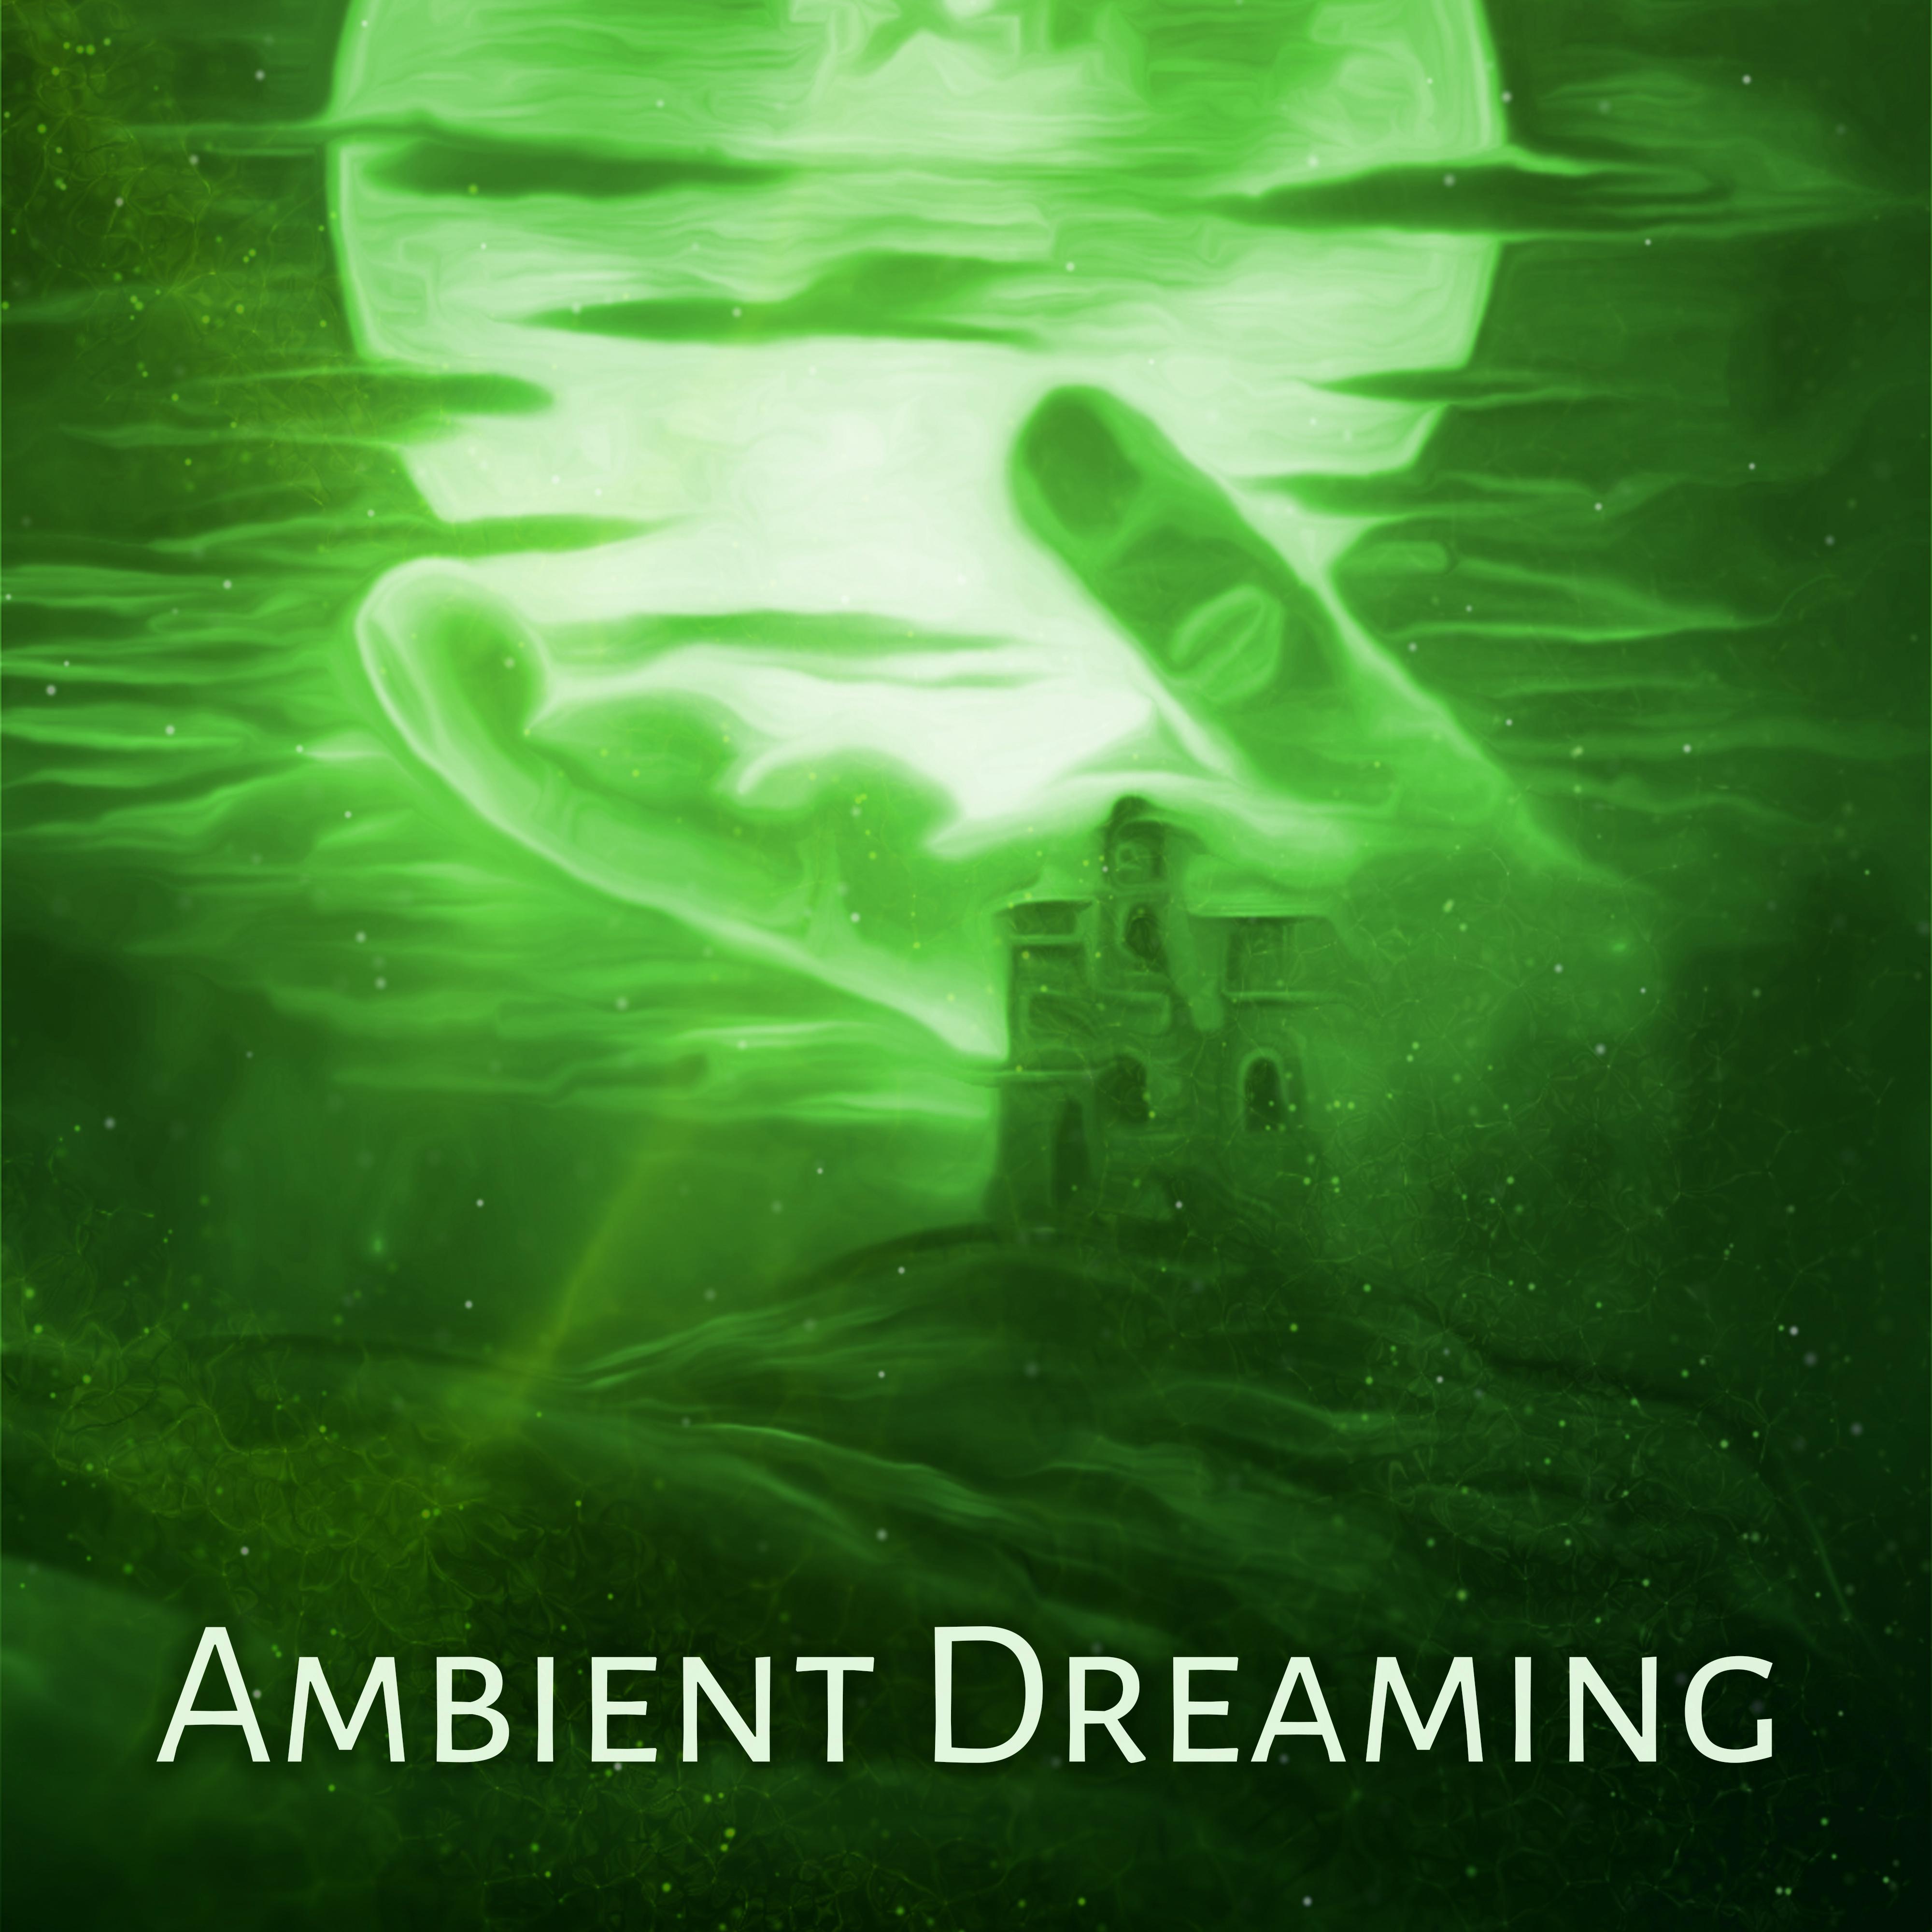 Ambient Dreaming  Soft Music to Sleep, New Age Dreaming Sounds, Fall Asleep with Soothing Vibes